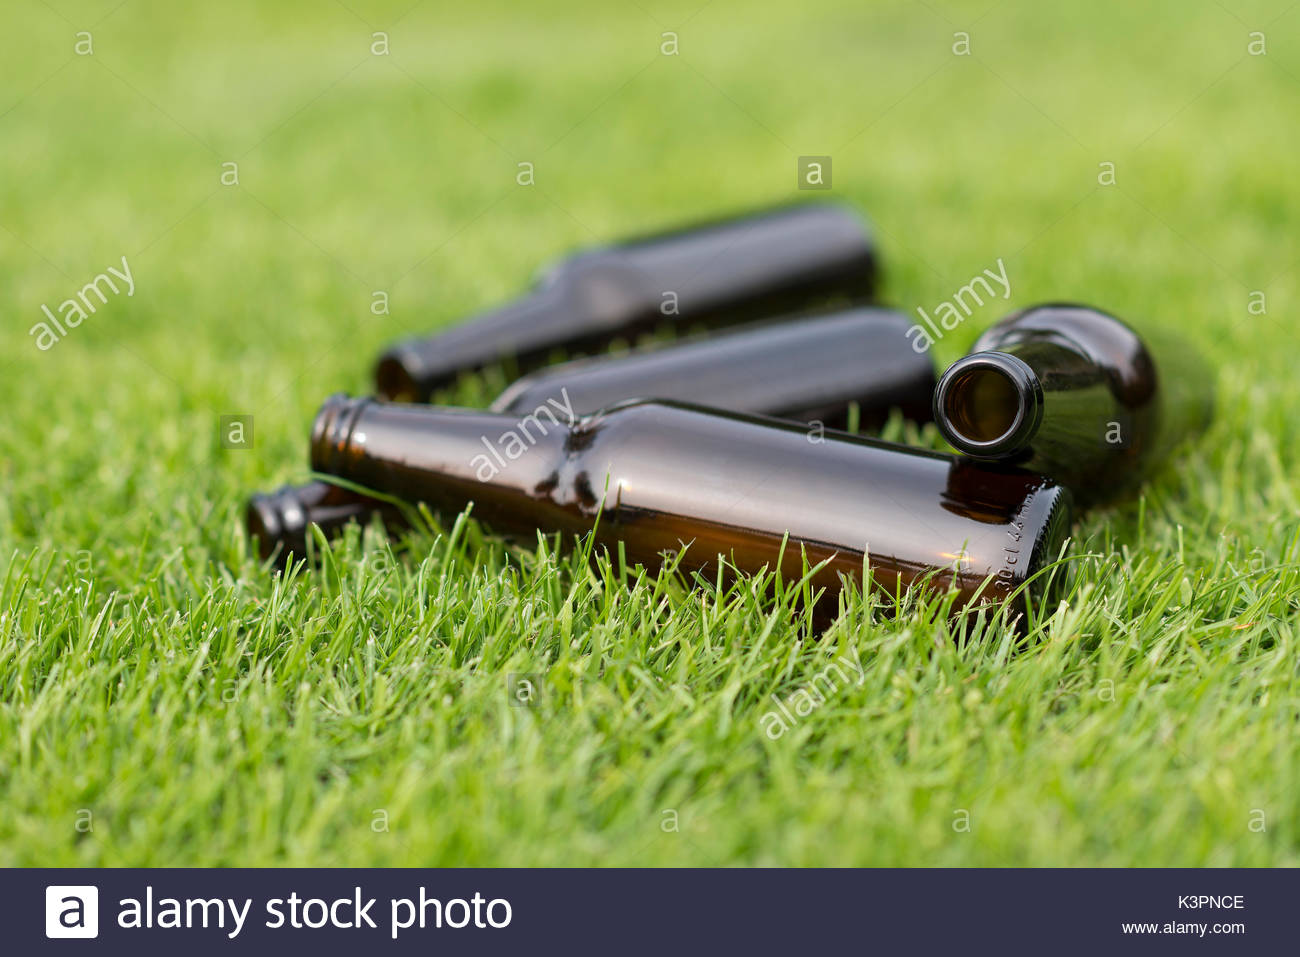 Empty Beer Bottles In A Grass Field With Vague Background Stock